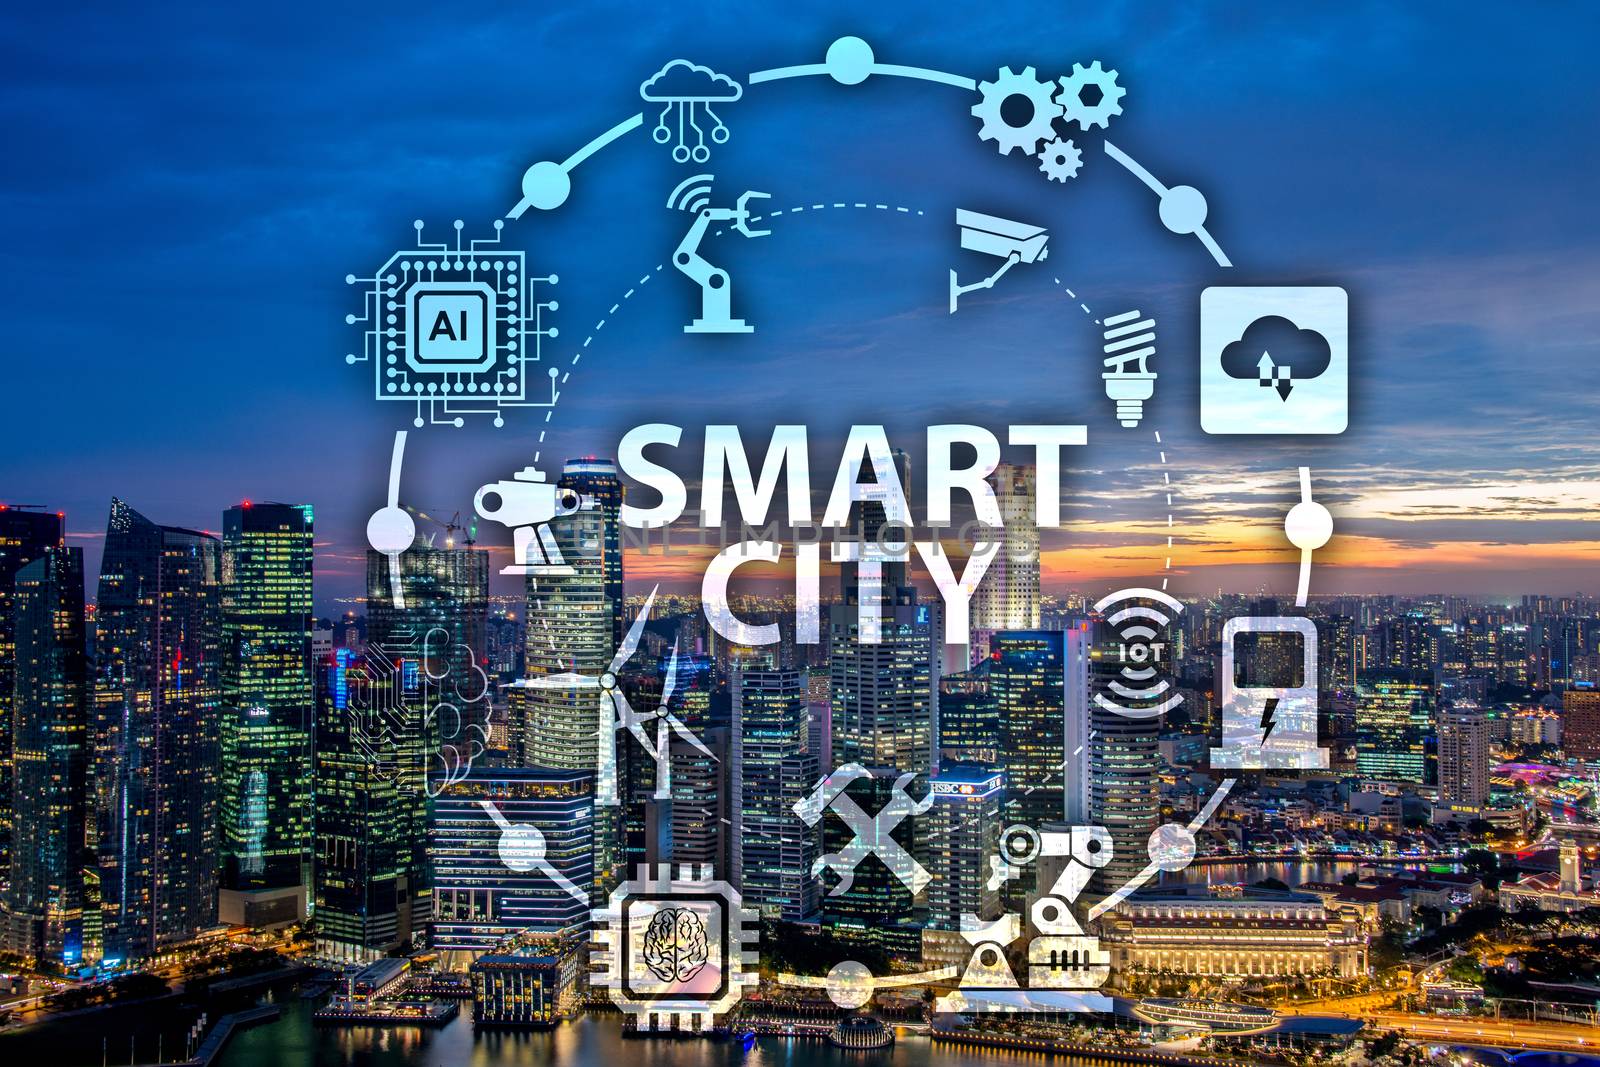 Concept of smart city and internet of things by Elnur